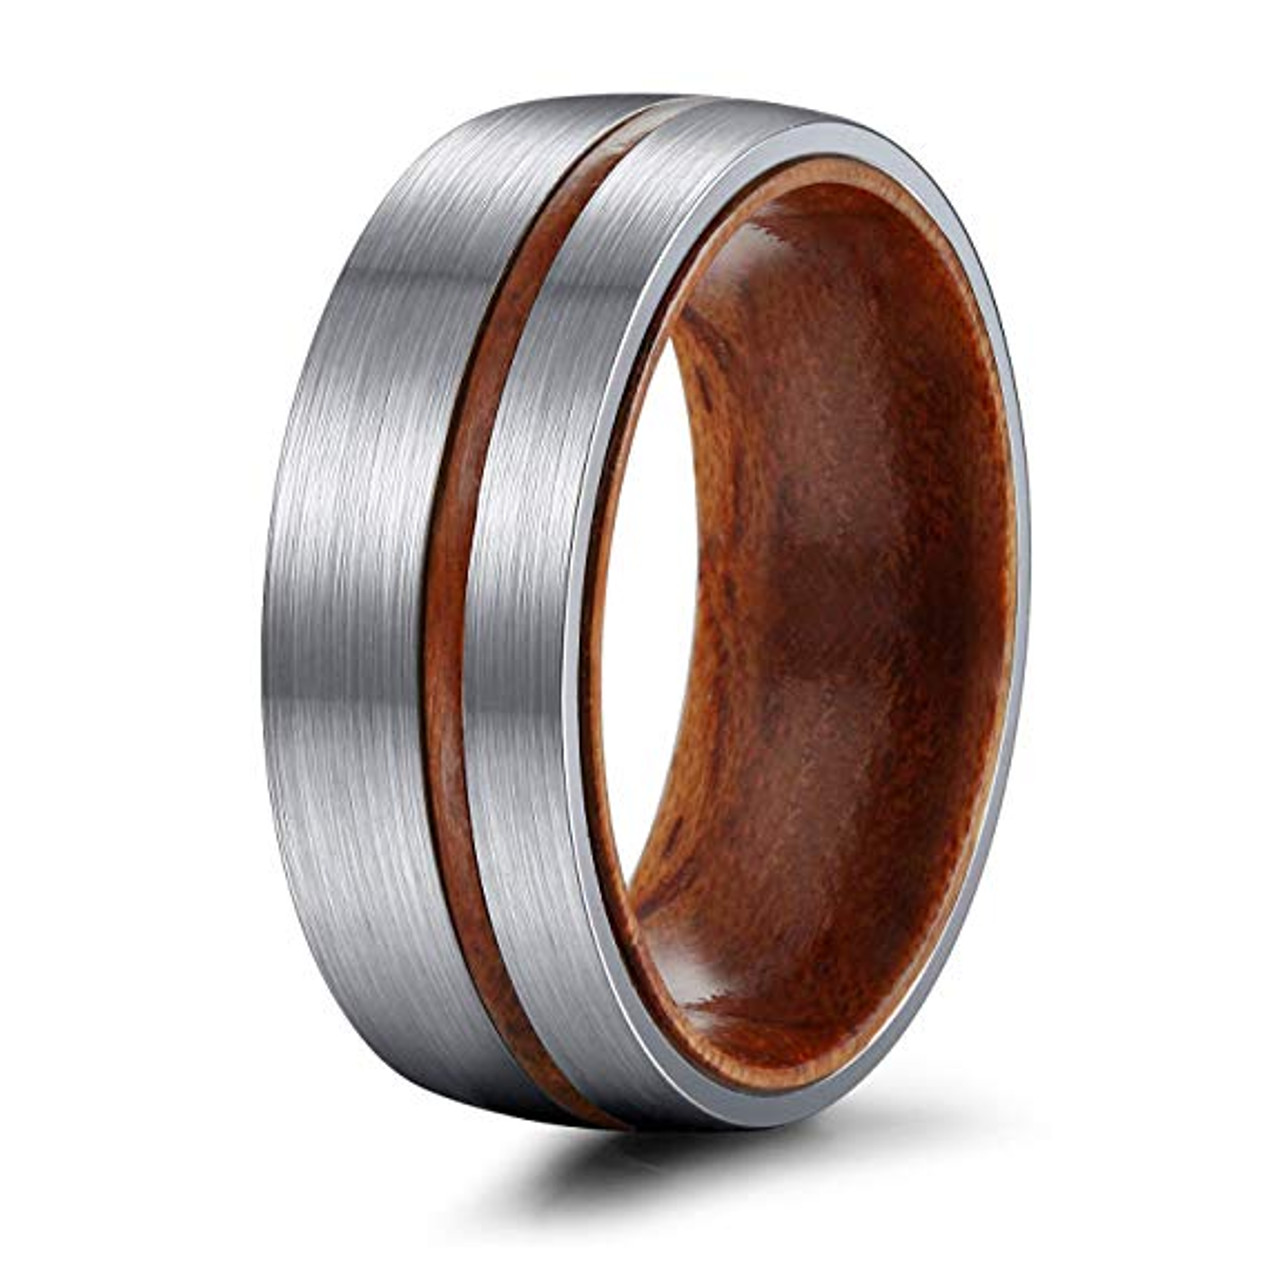 (8mm)  Unisex or Men's Titanium Wedding ring bands. Brushed Silver Tone Ring with Thin Striped Dark Wood Inlay and Smooth Wood Inside Band. Domed Light Weight Ring.